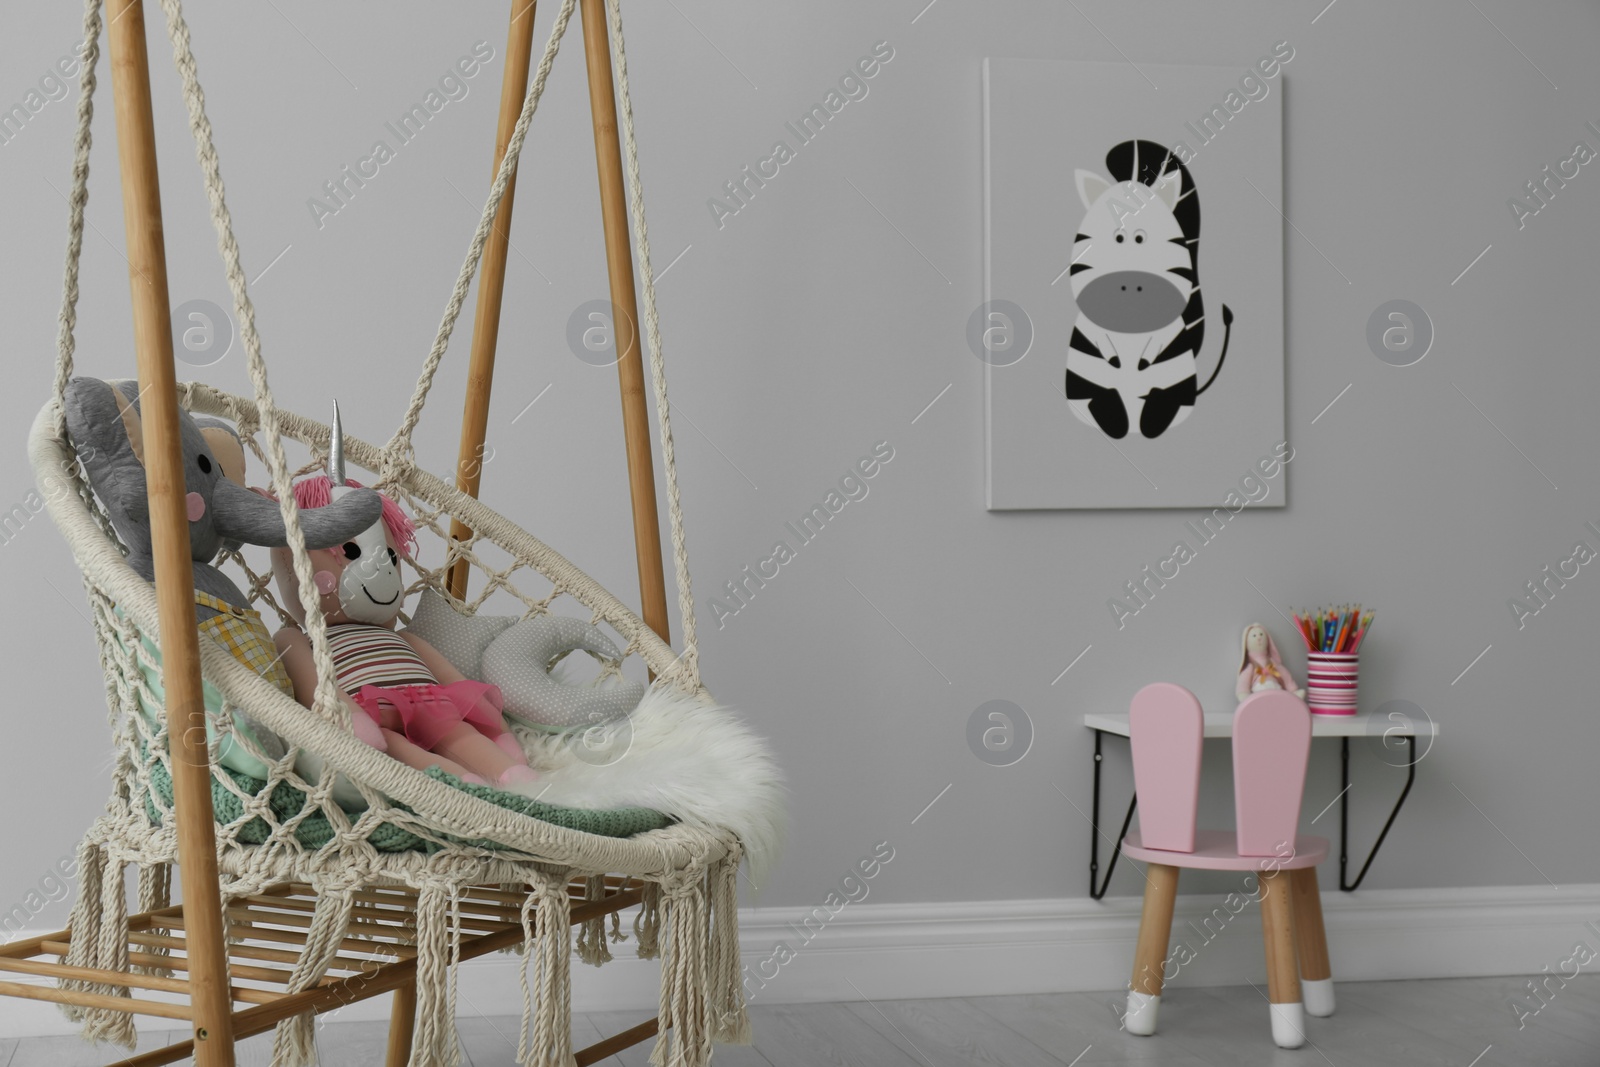 Photo of Stylish child's room interior with adorable painting and hanging chair